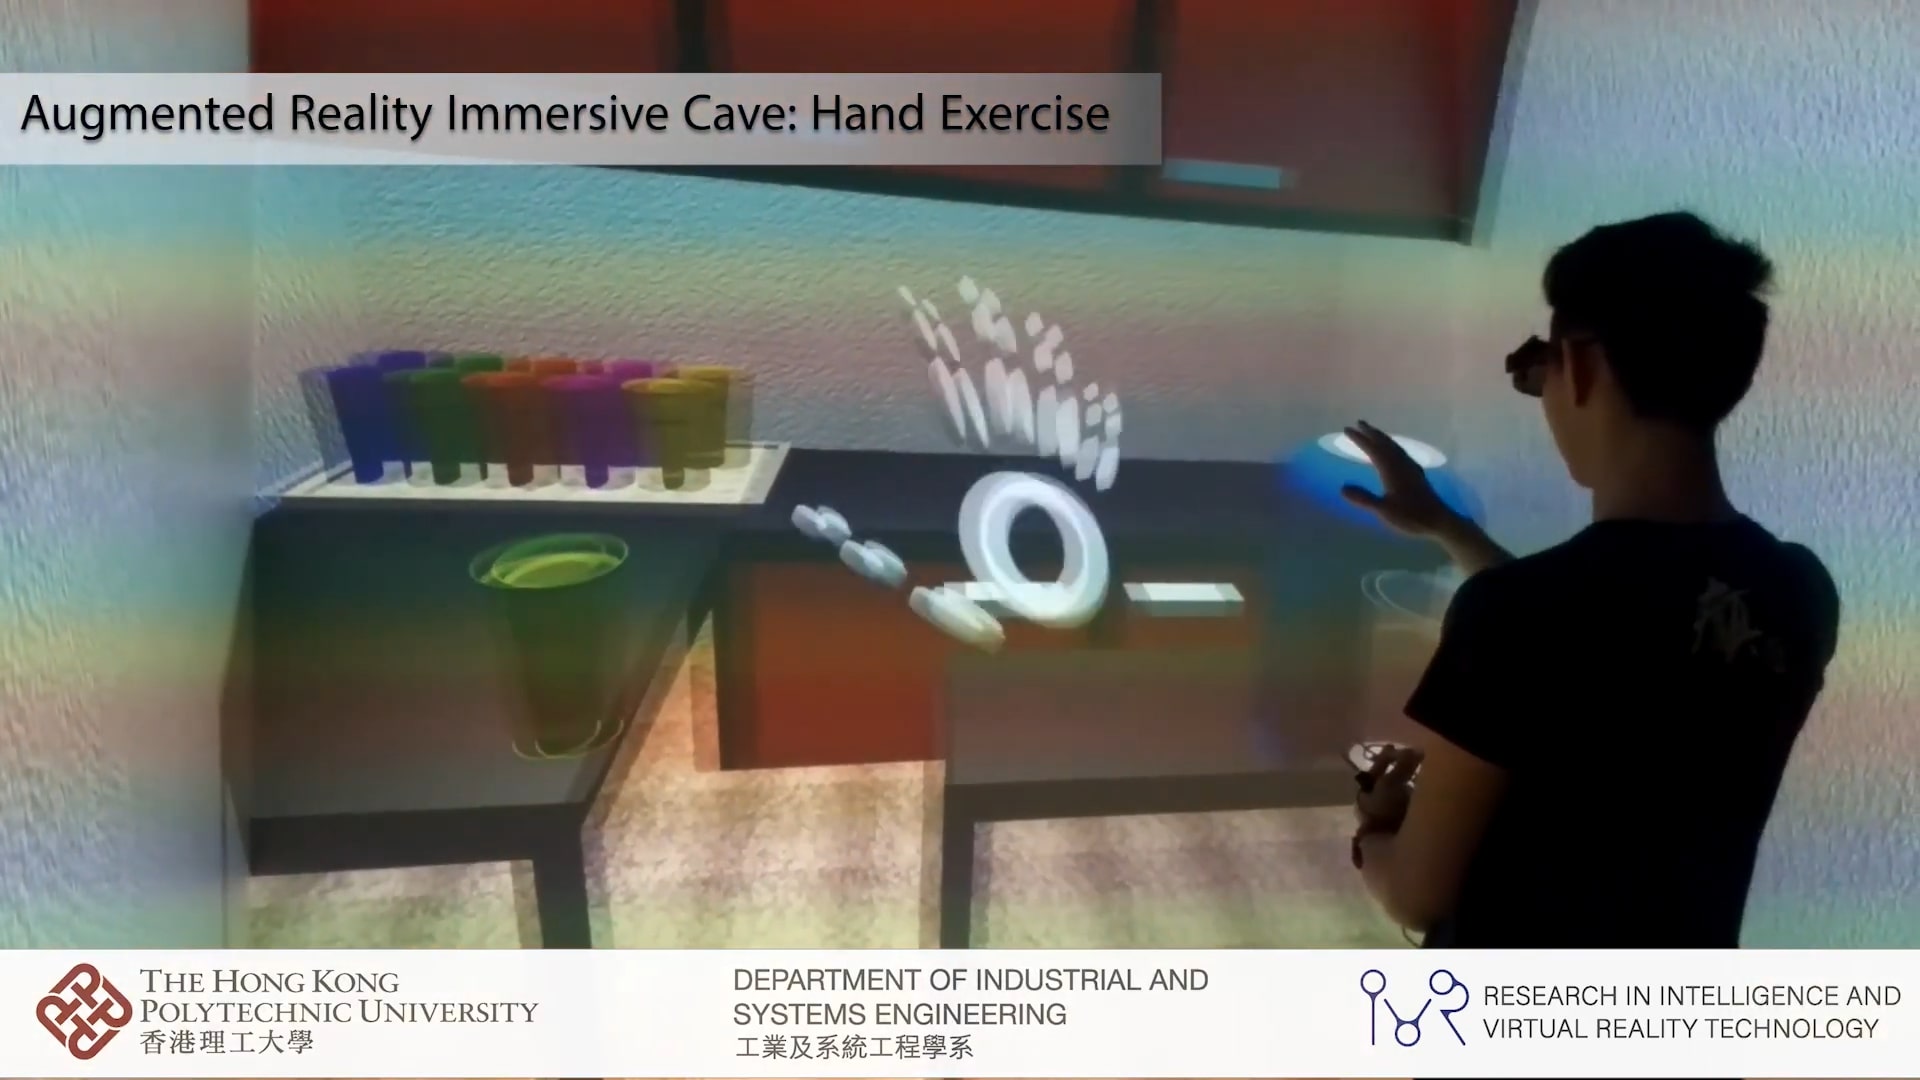 Hand Exercise using VR CAVE